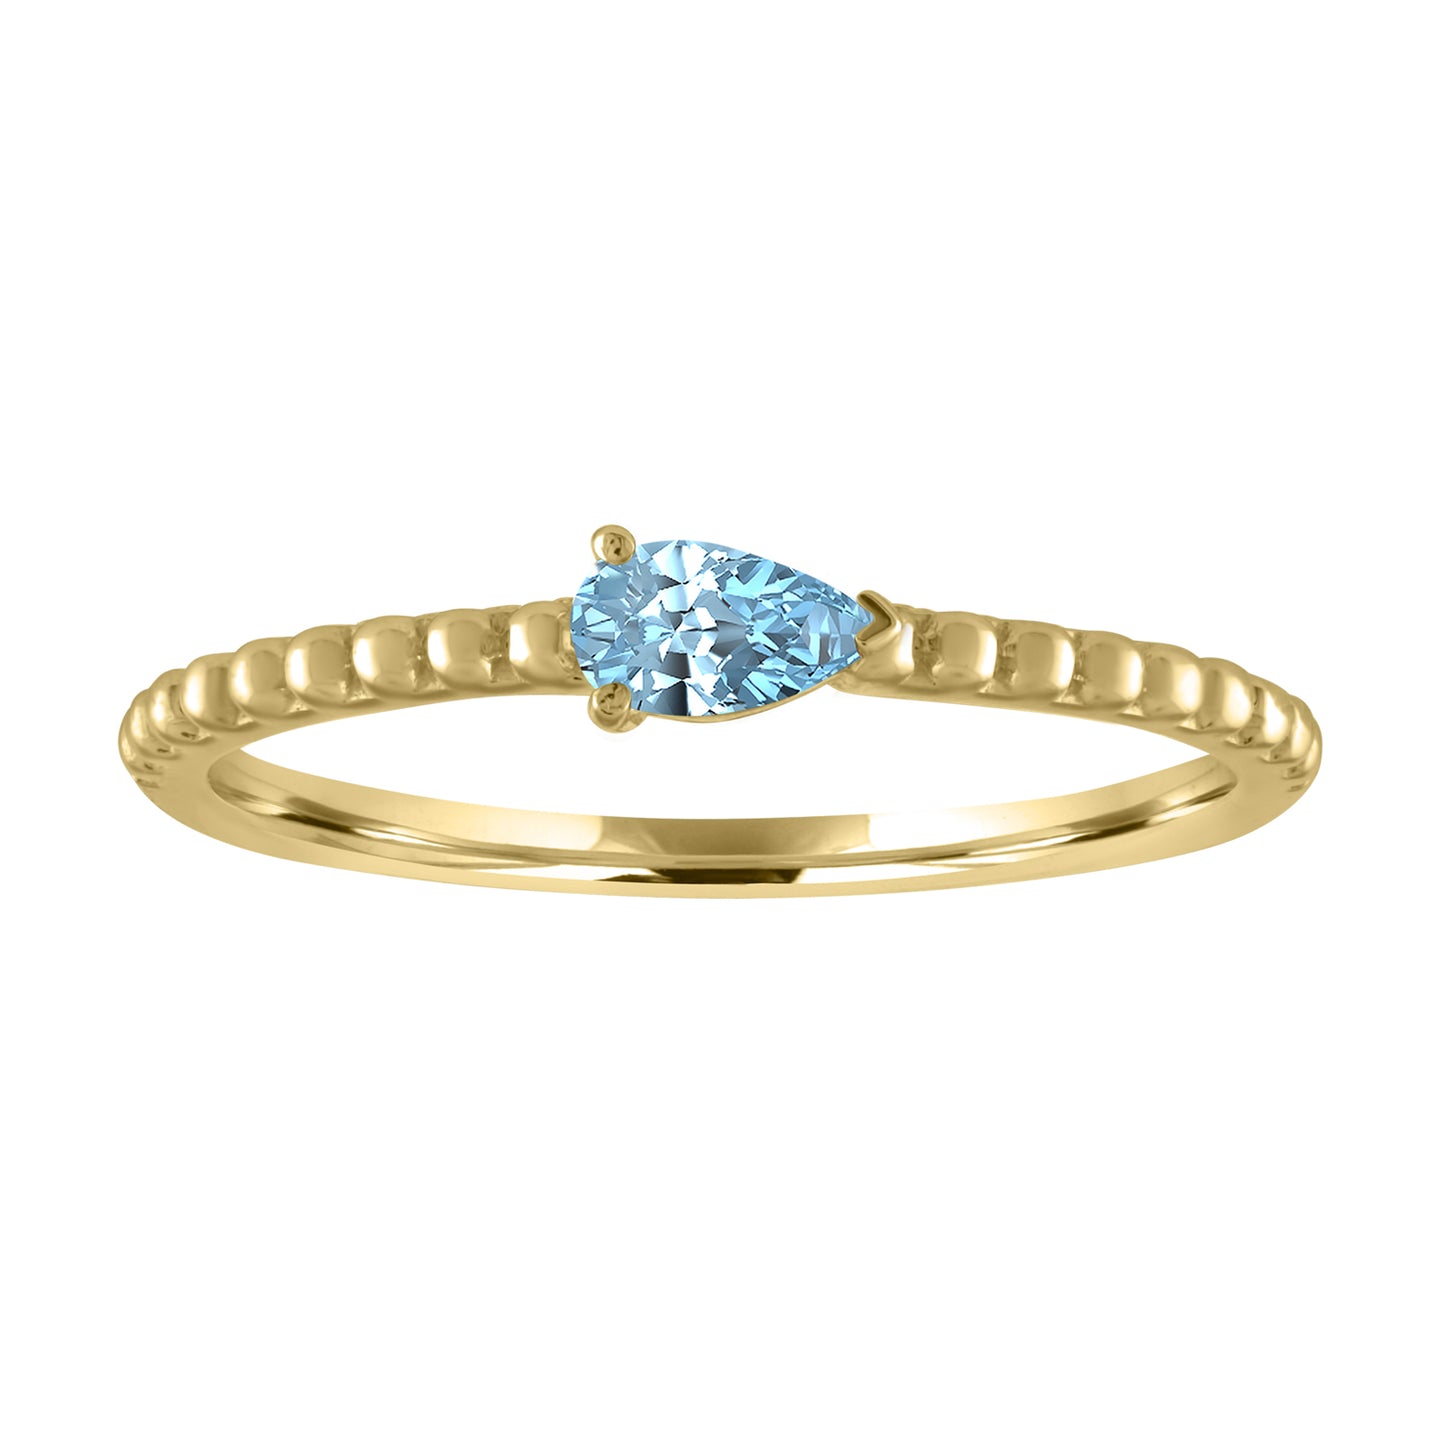 Yellow gold beaded skinny band with a pear shaped aquamarine in the center. 